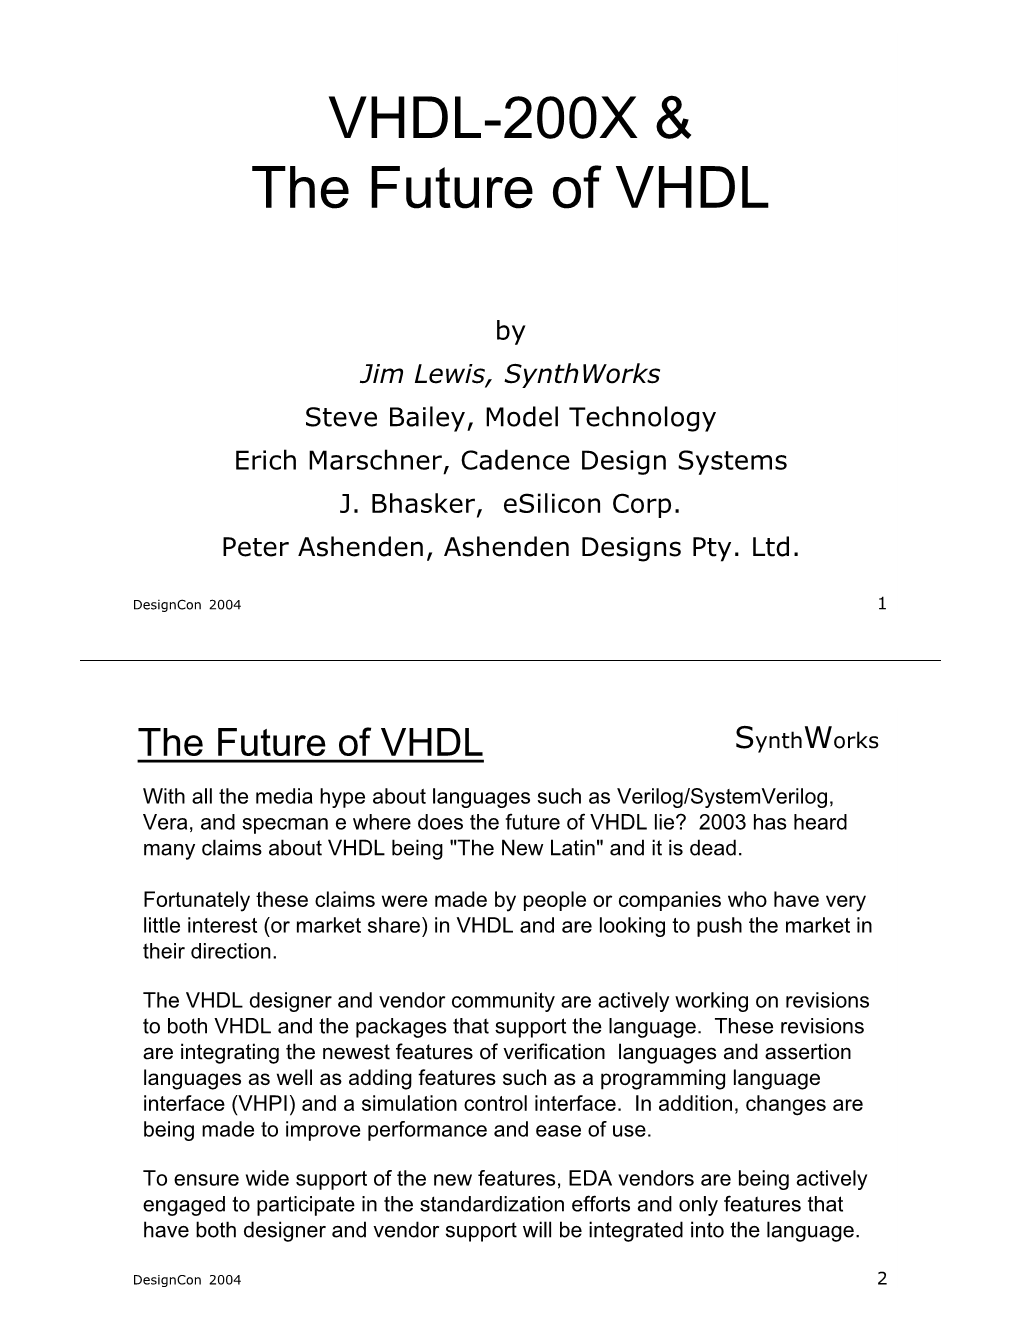 VHDL-200X & the Future of VHDL